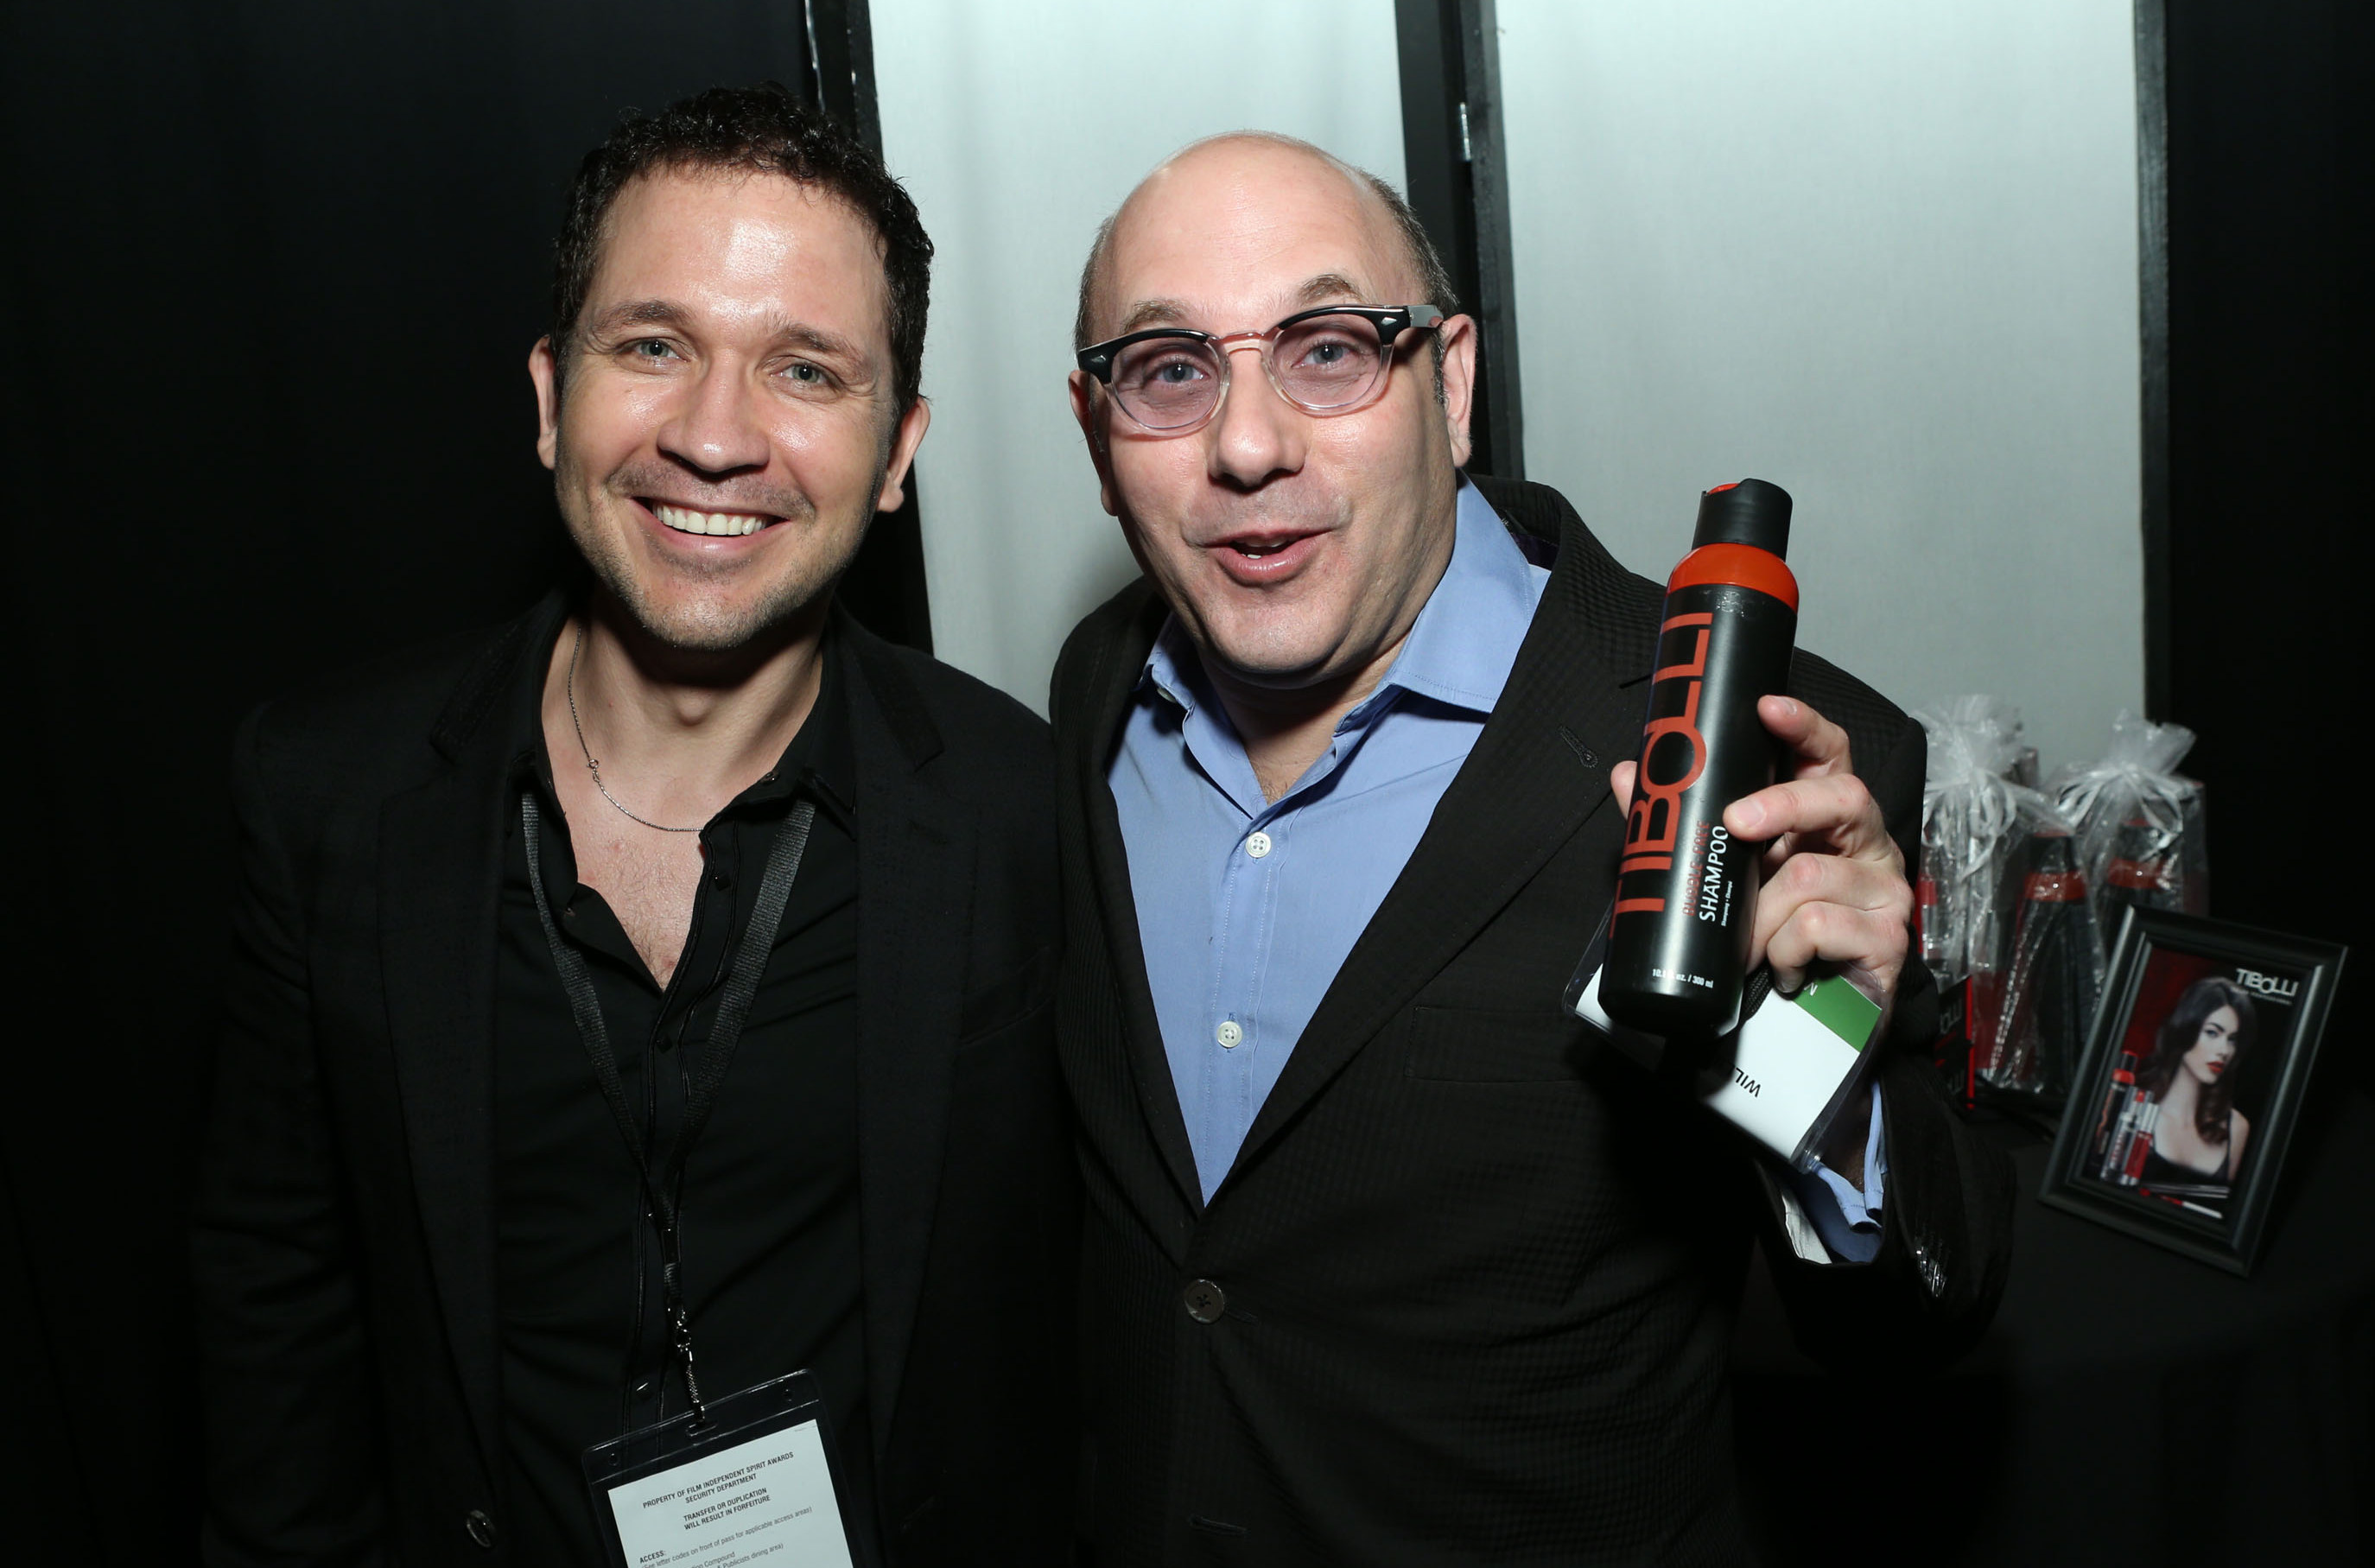 Van Tibolli, Founder and CEO of Tibolli hair care and Willie Garson, Actor from the hit TV show, Sex & the City